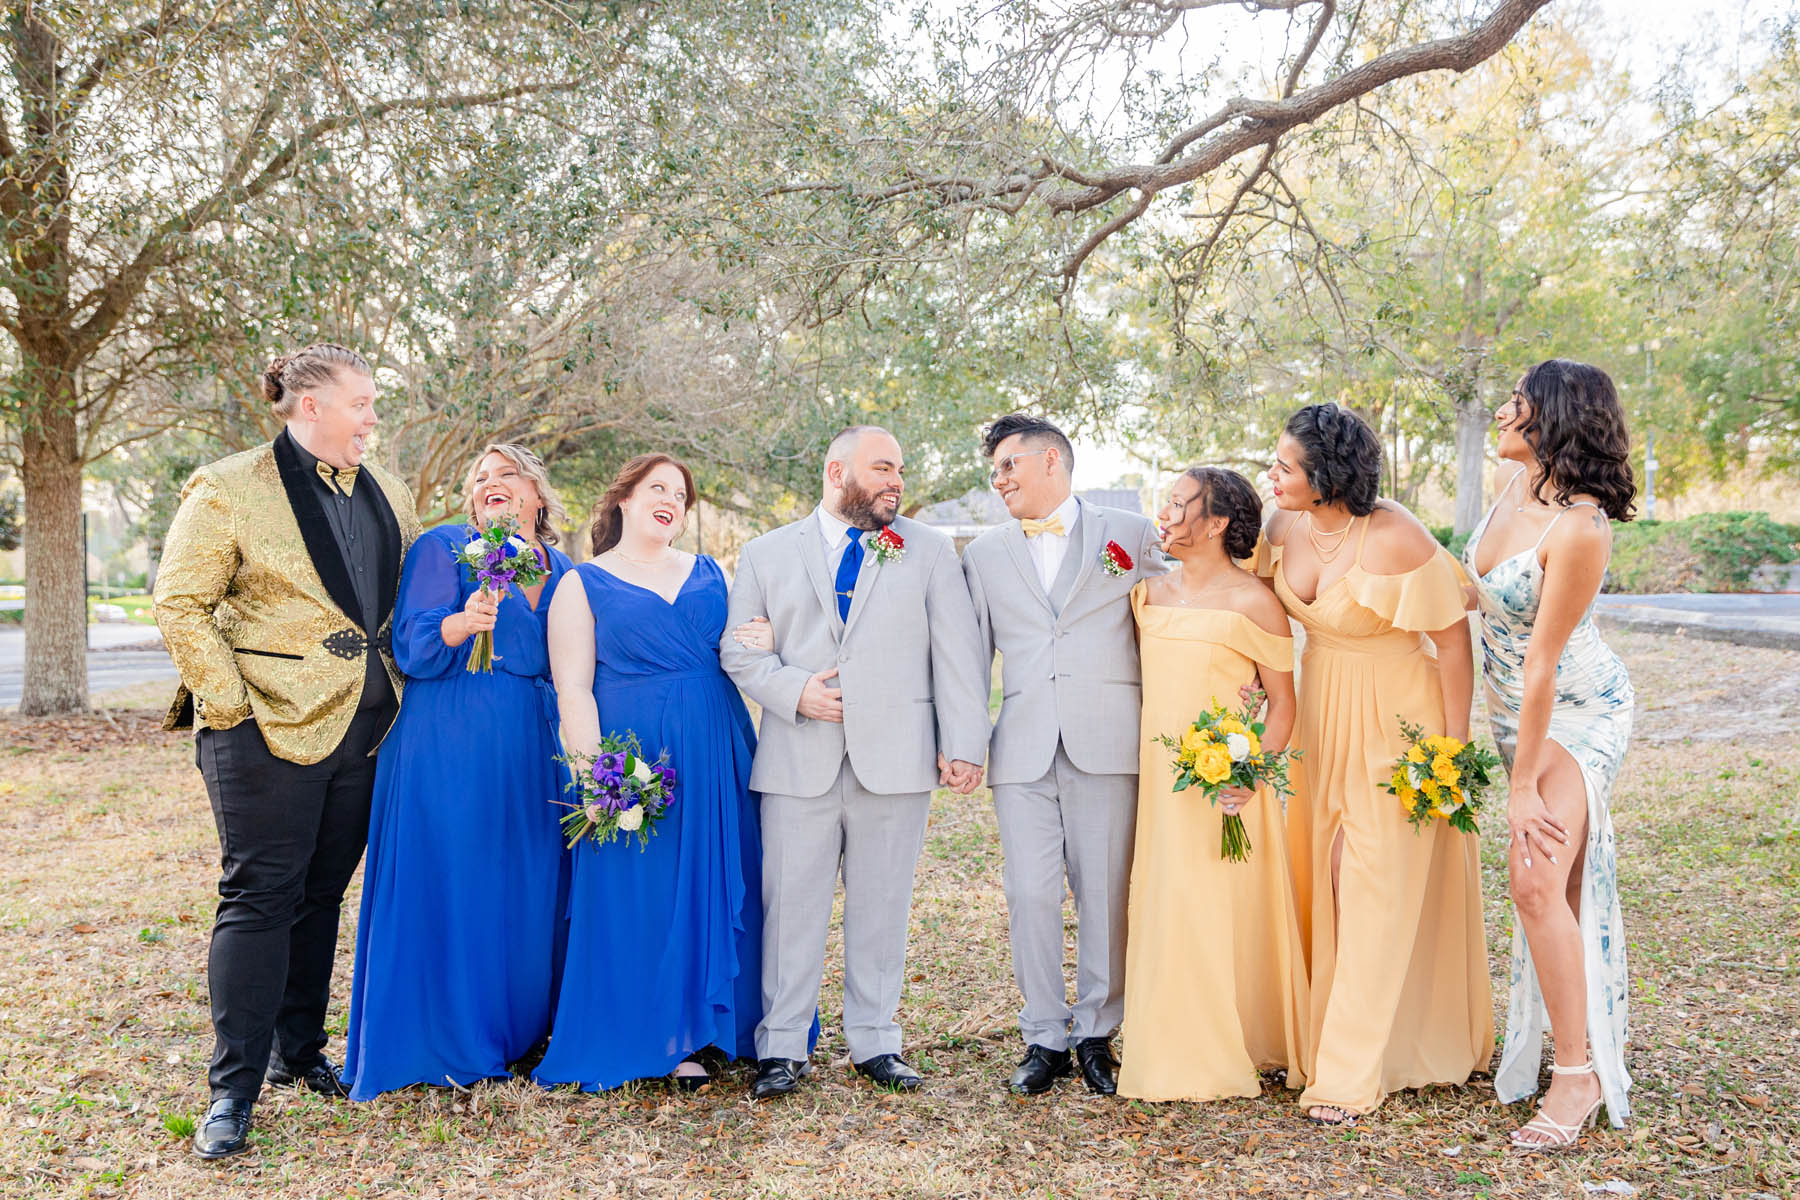 Two Latinx grooms in blue suits stand in the center of a line of their wedding party. Everyone is laughing, and they are standing in front of a backdrop of trees.